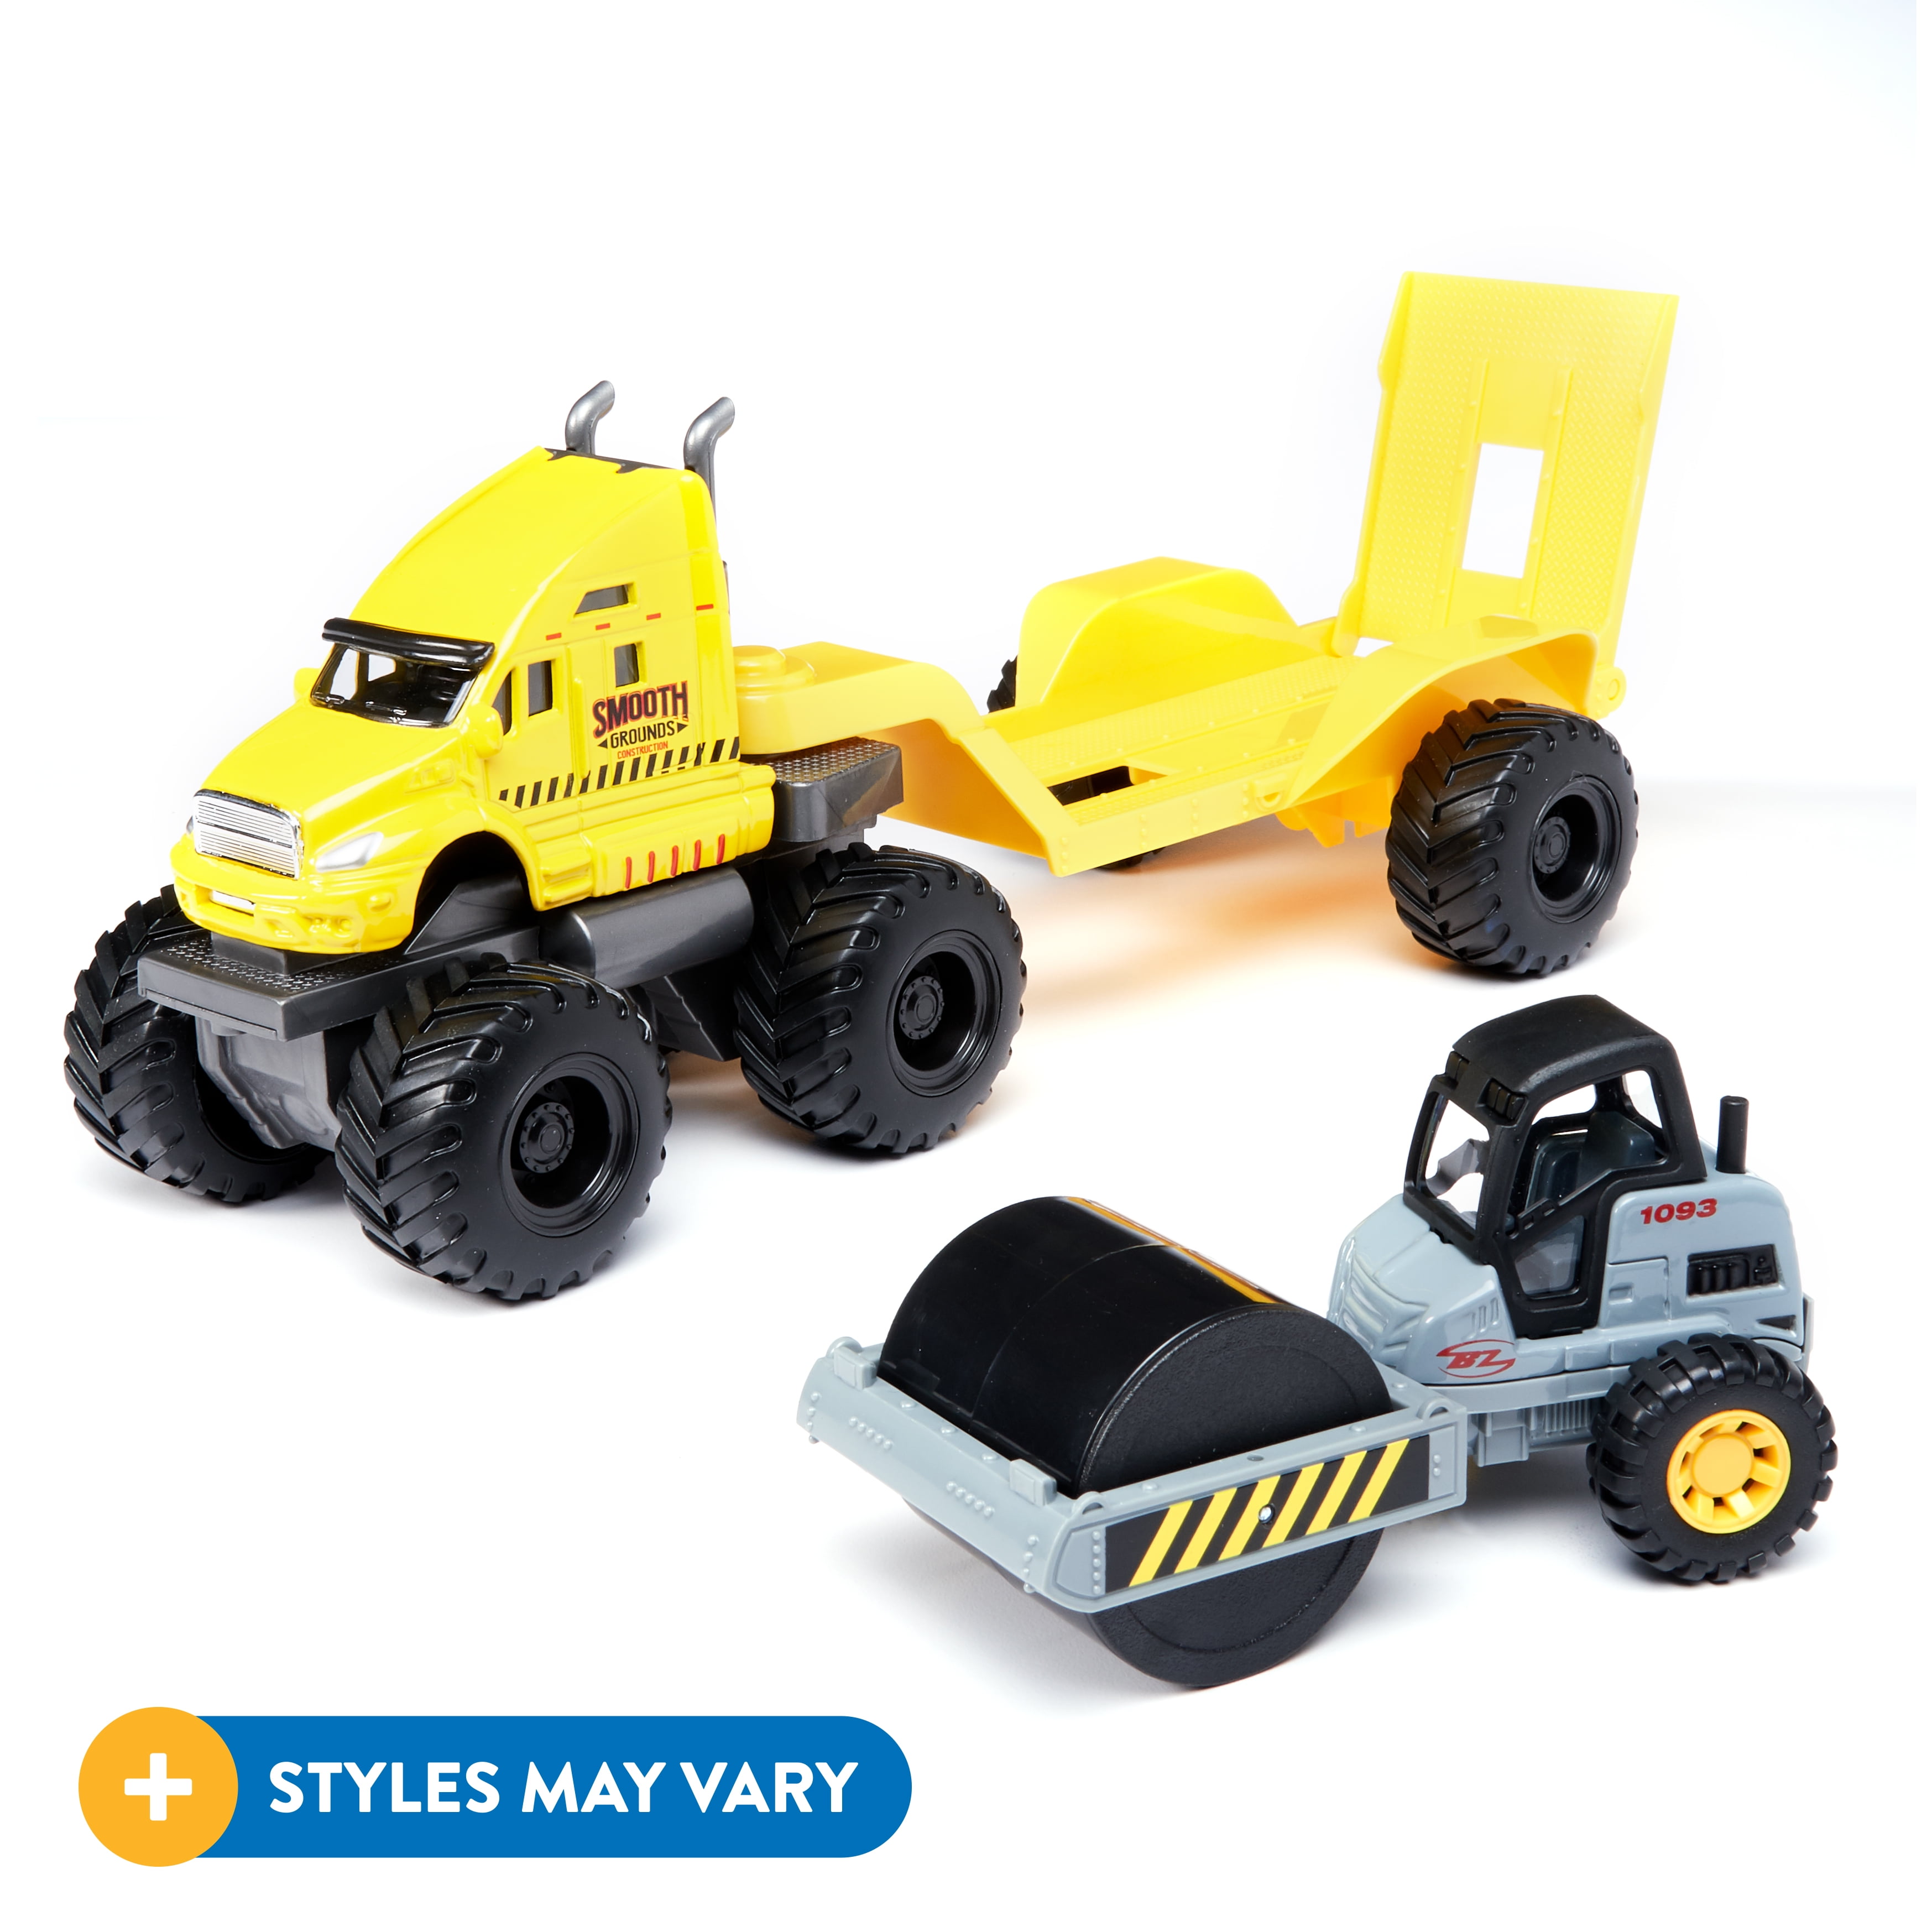 Adventure Force Quarry Haulers Motorized Truck Play Vehicles, Assorted Styles